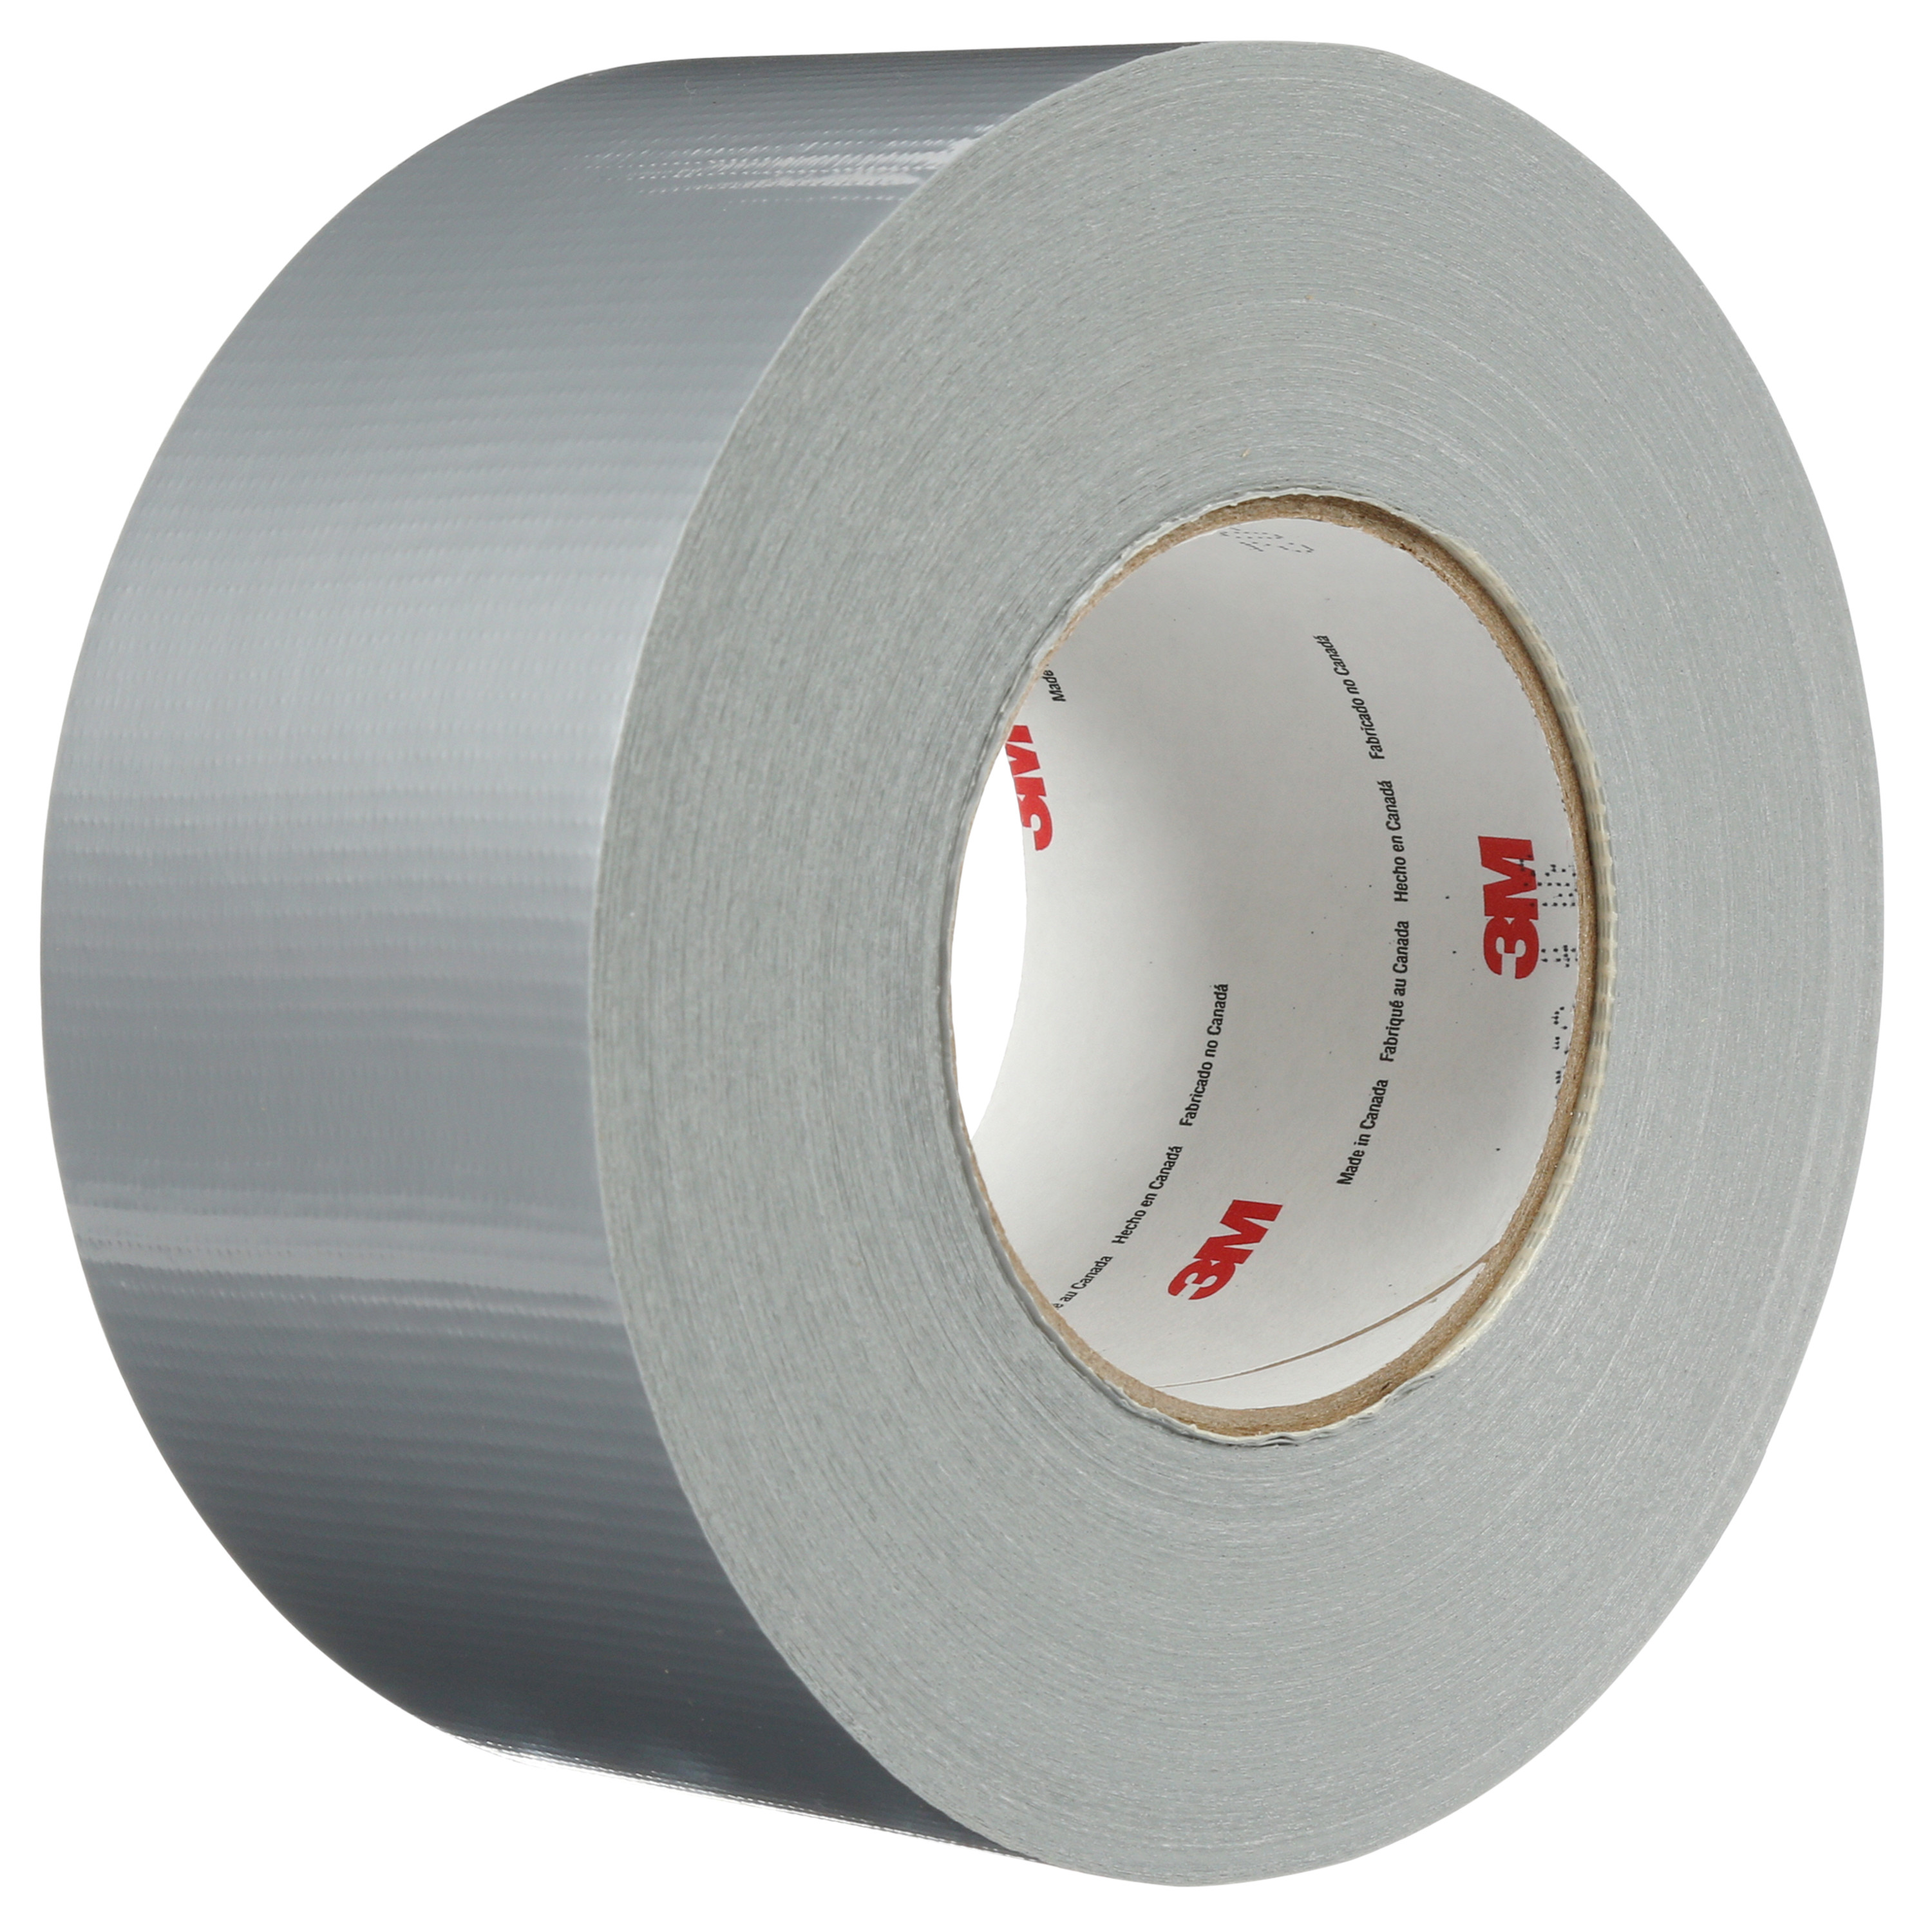 3M™ Extra Heavy Duty Duct Tape 6969, Silver, 72 mm x 54.8 m, 10.7 mil,
12 per case